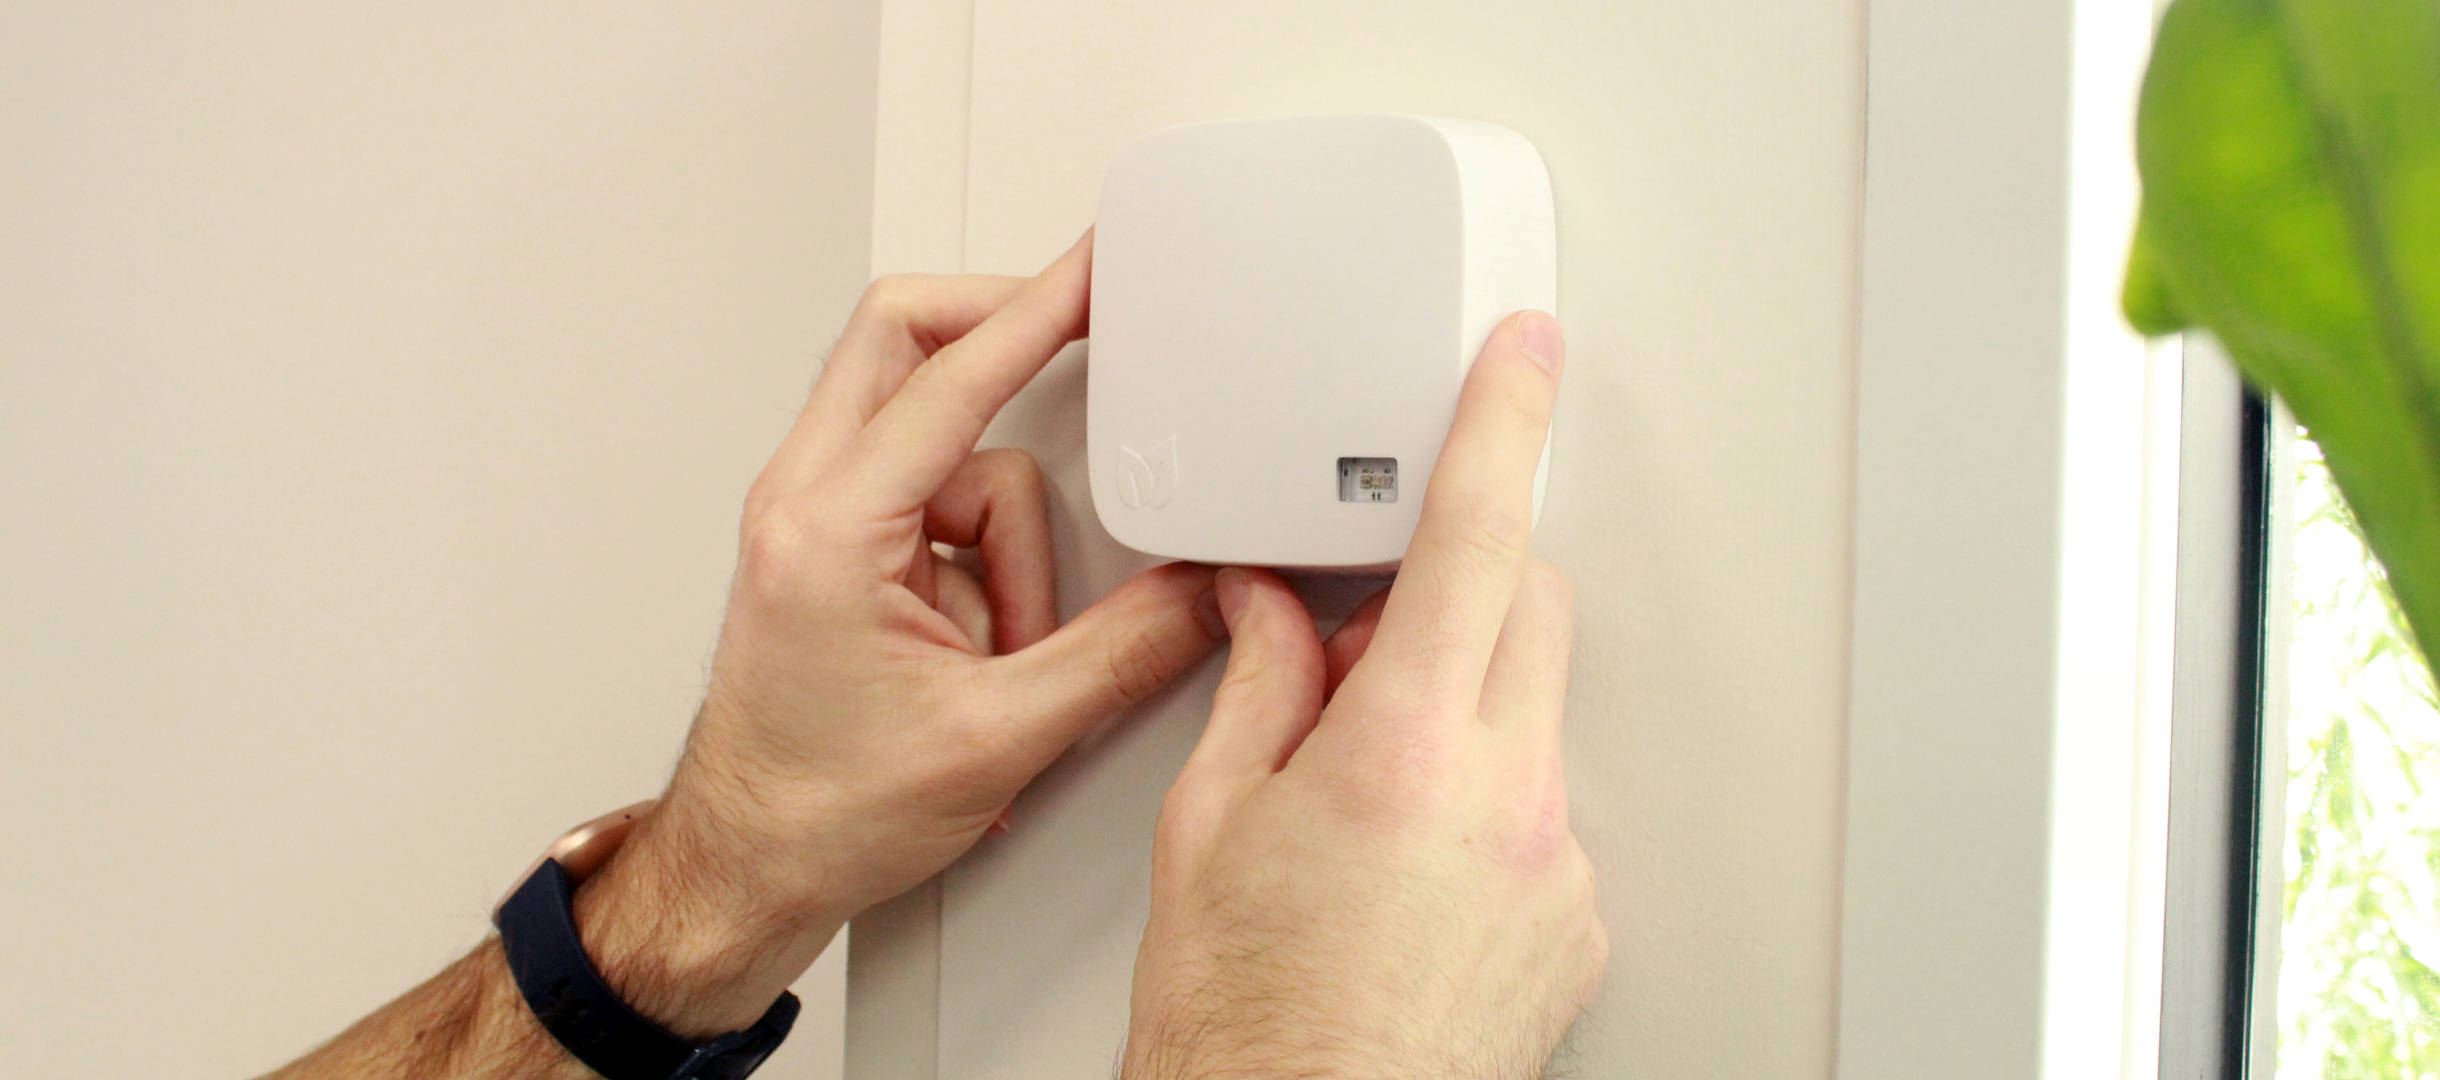 An AirSuite Sense device being mounted to the wall